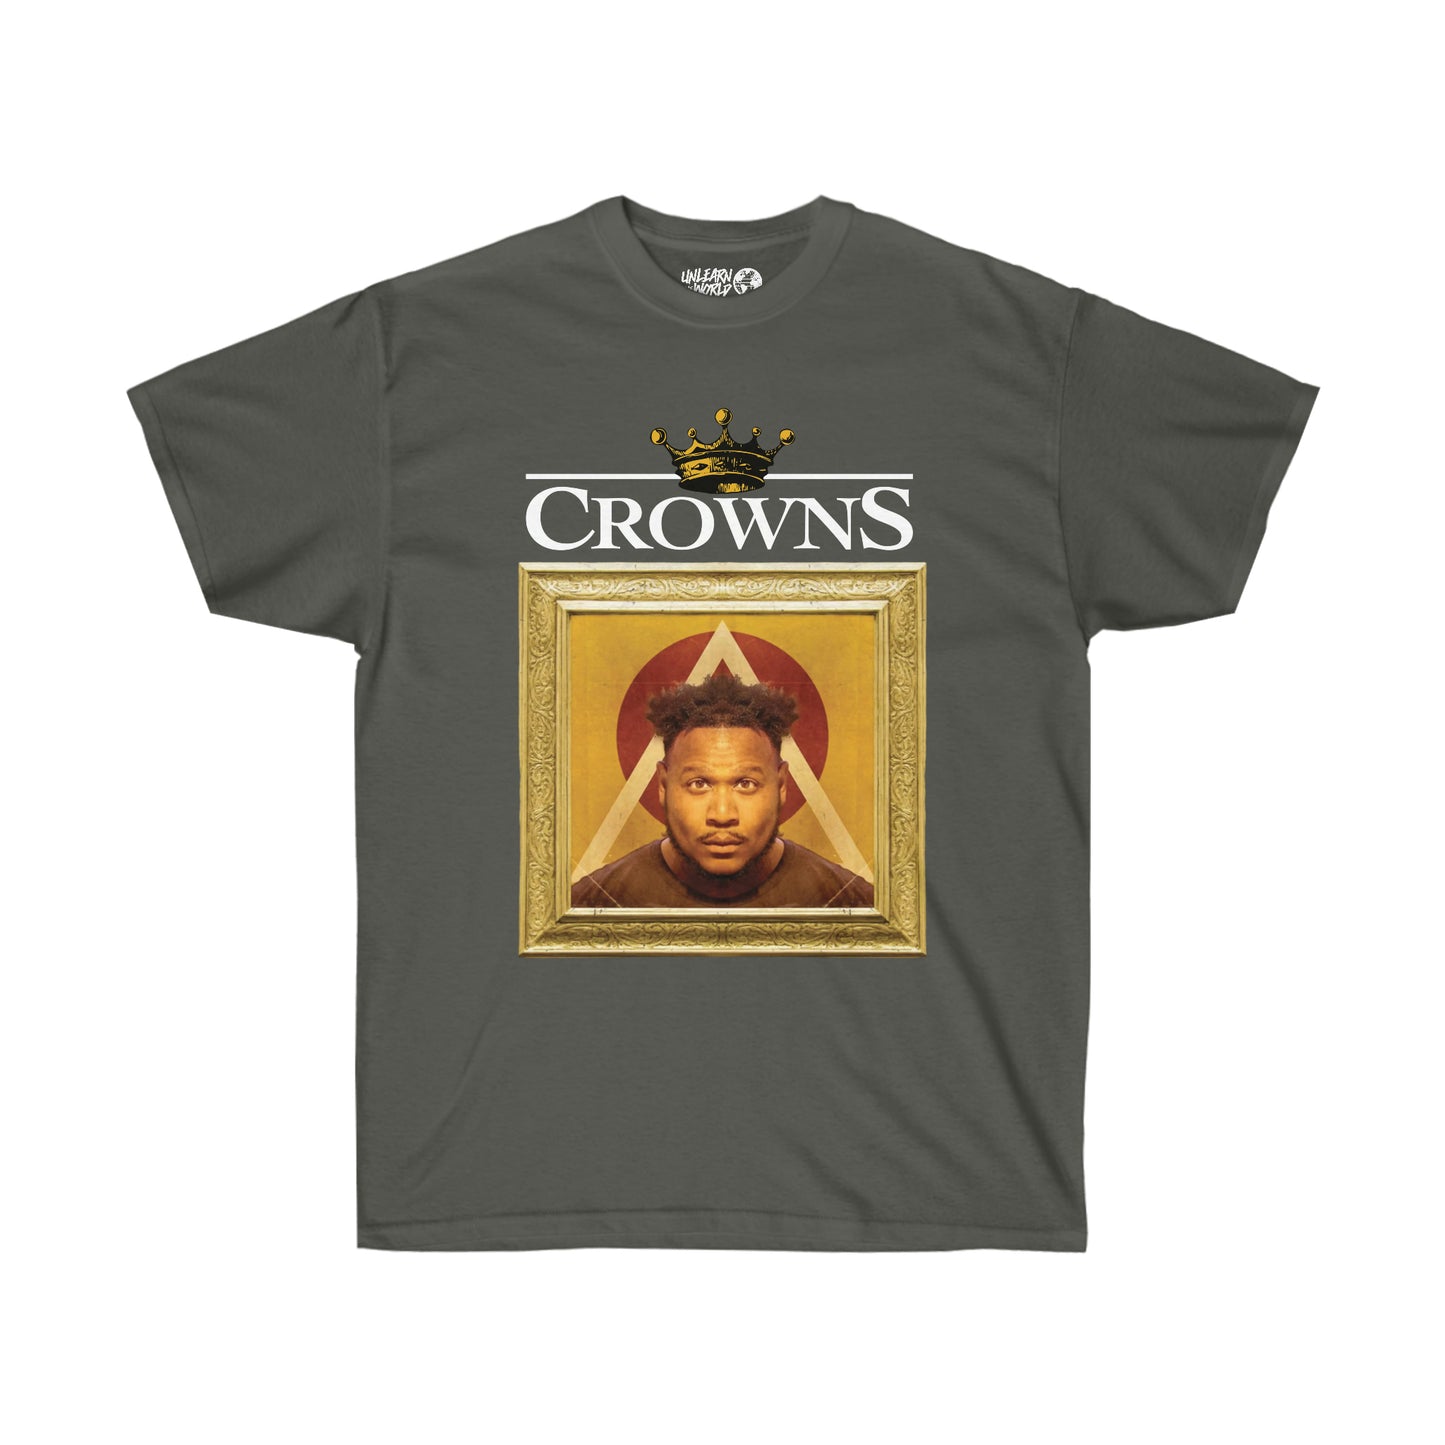 Unlearn The World - Crowns Tee